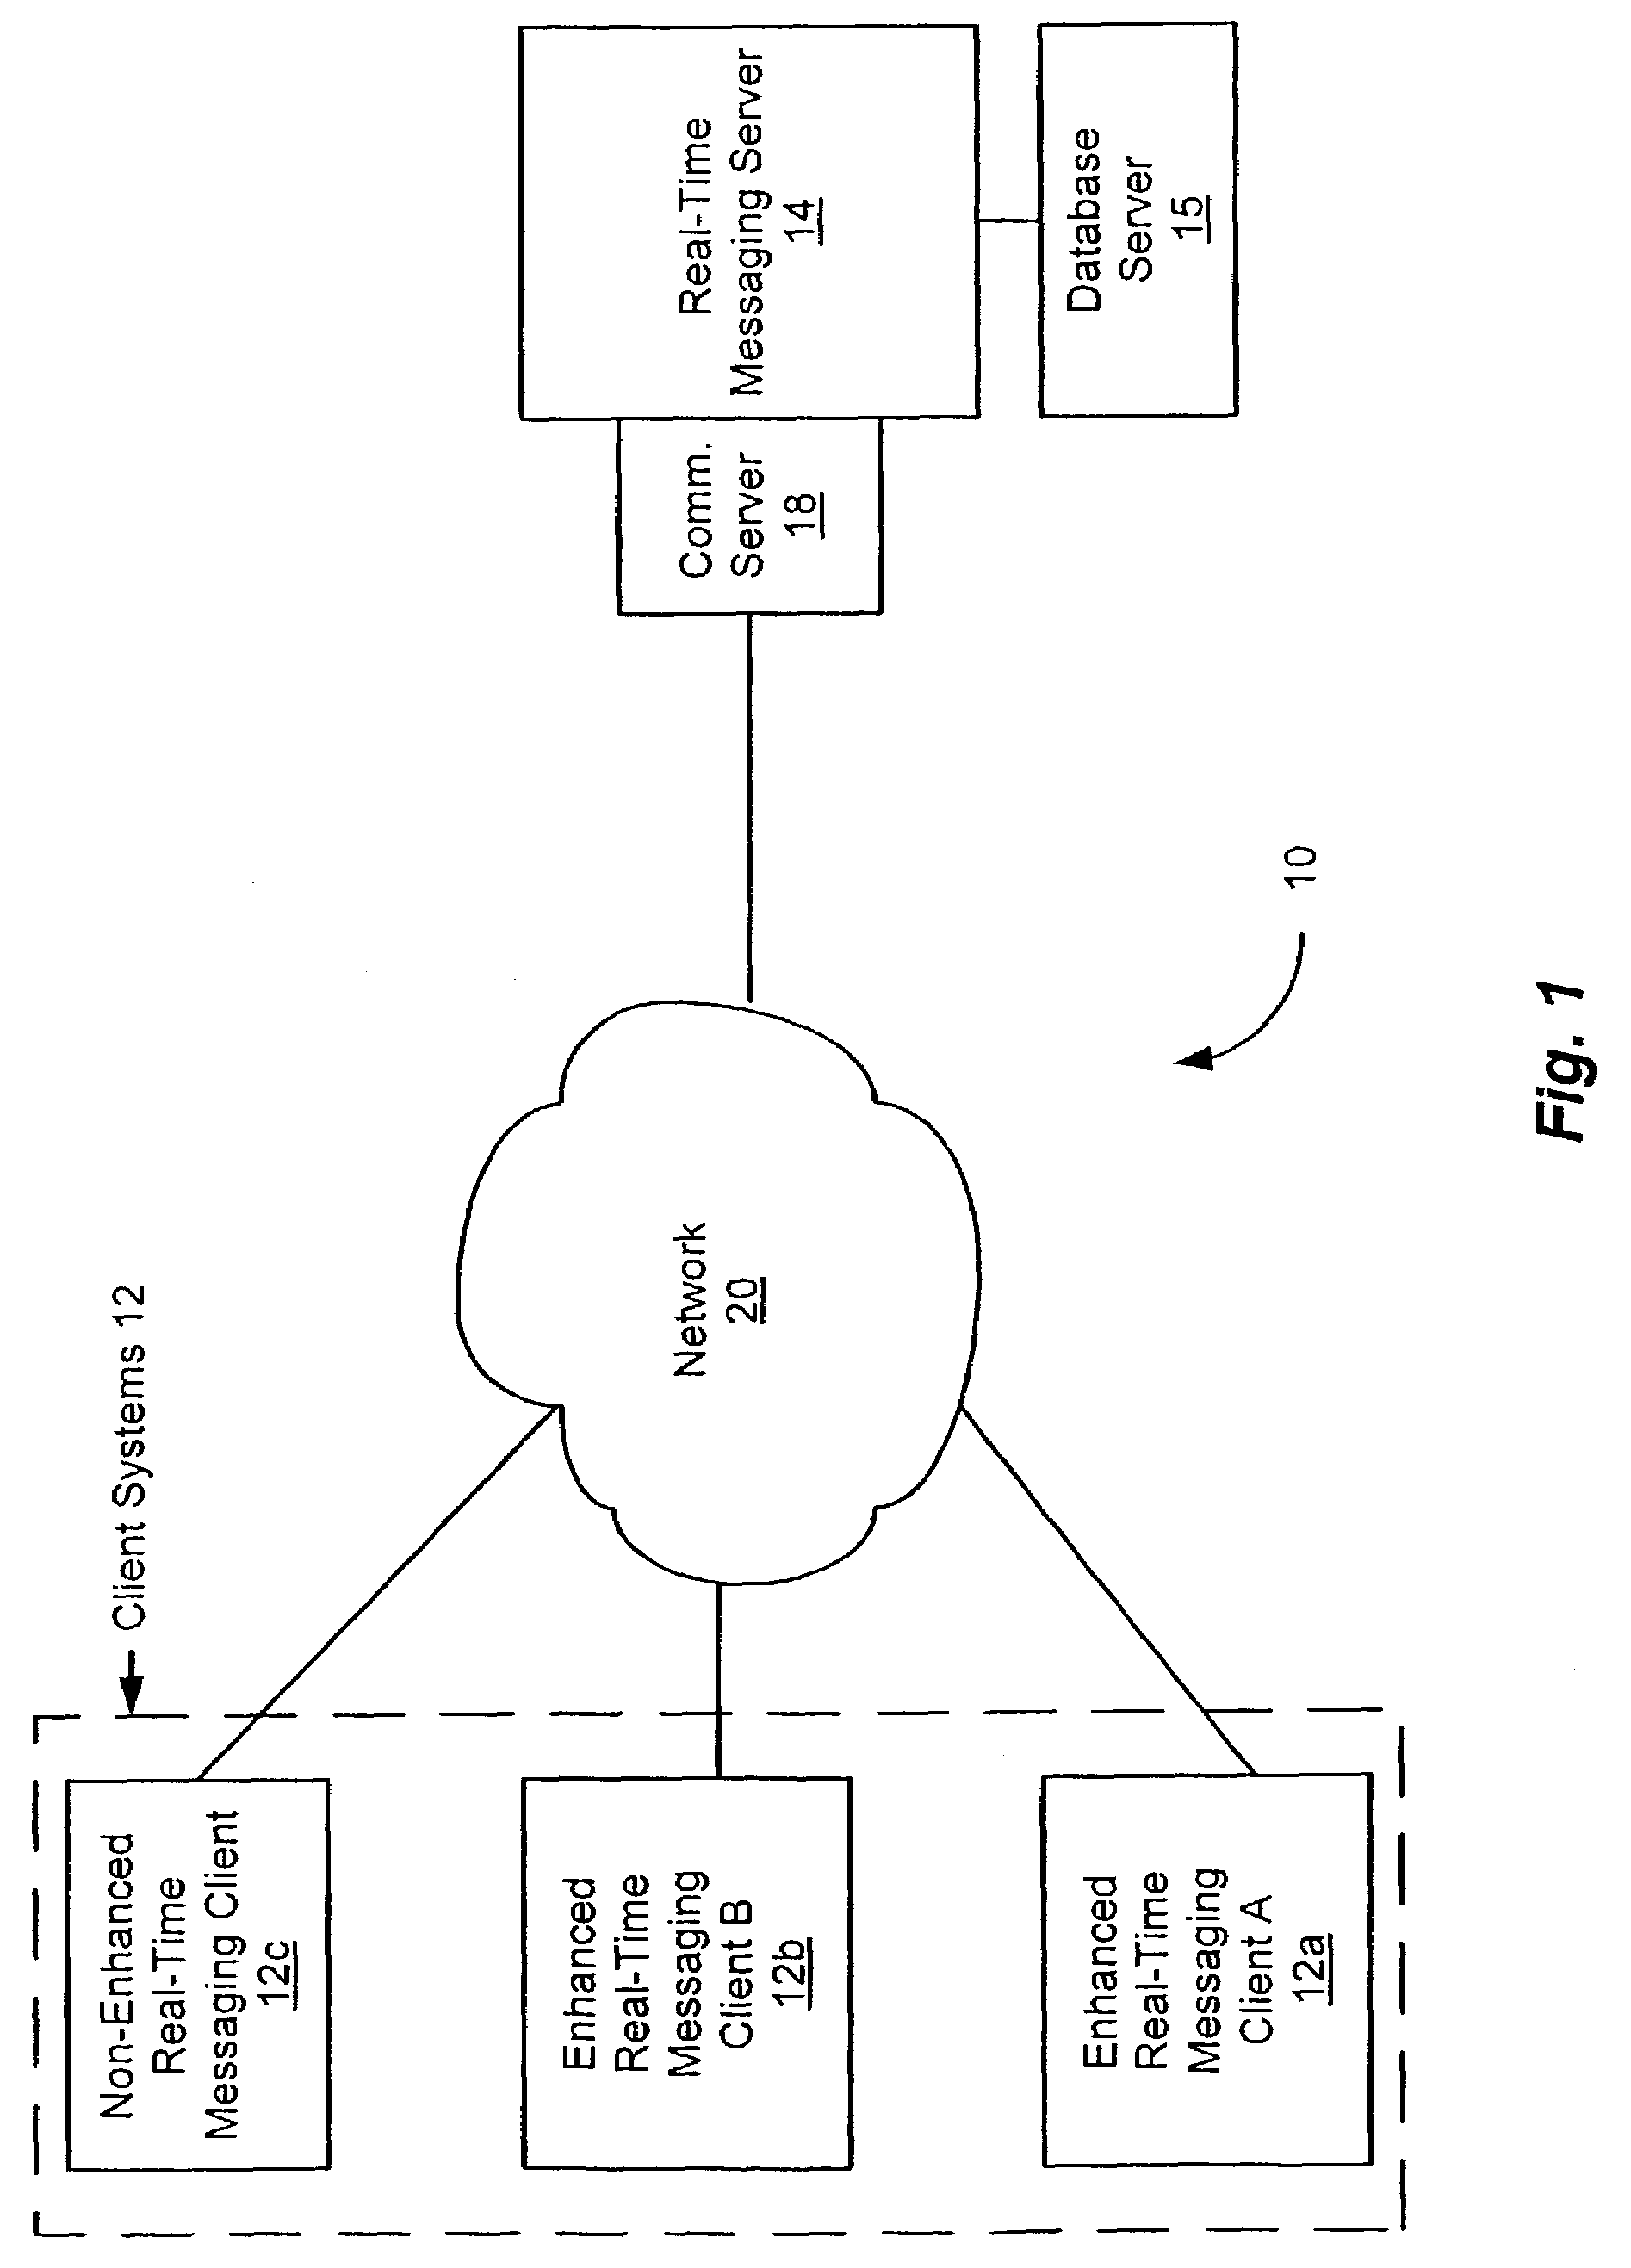 System and method for immediate and delayed real-time communication activities using availability data from and communications through an external instant messaging system